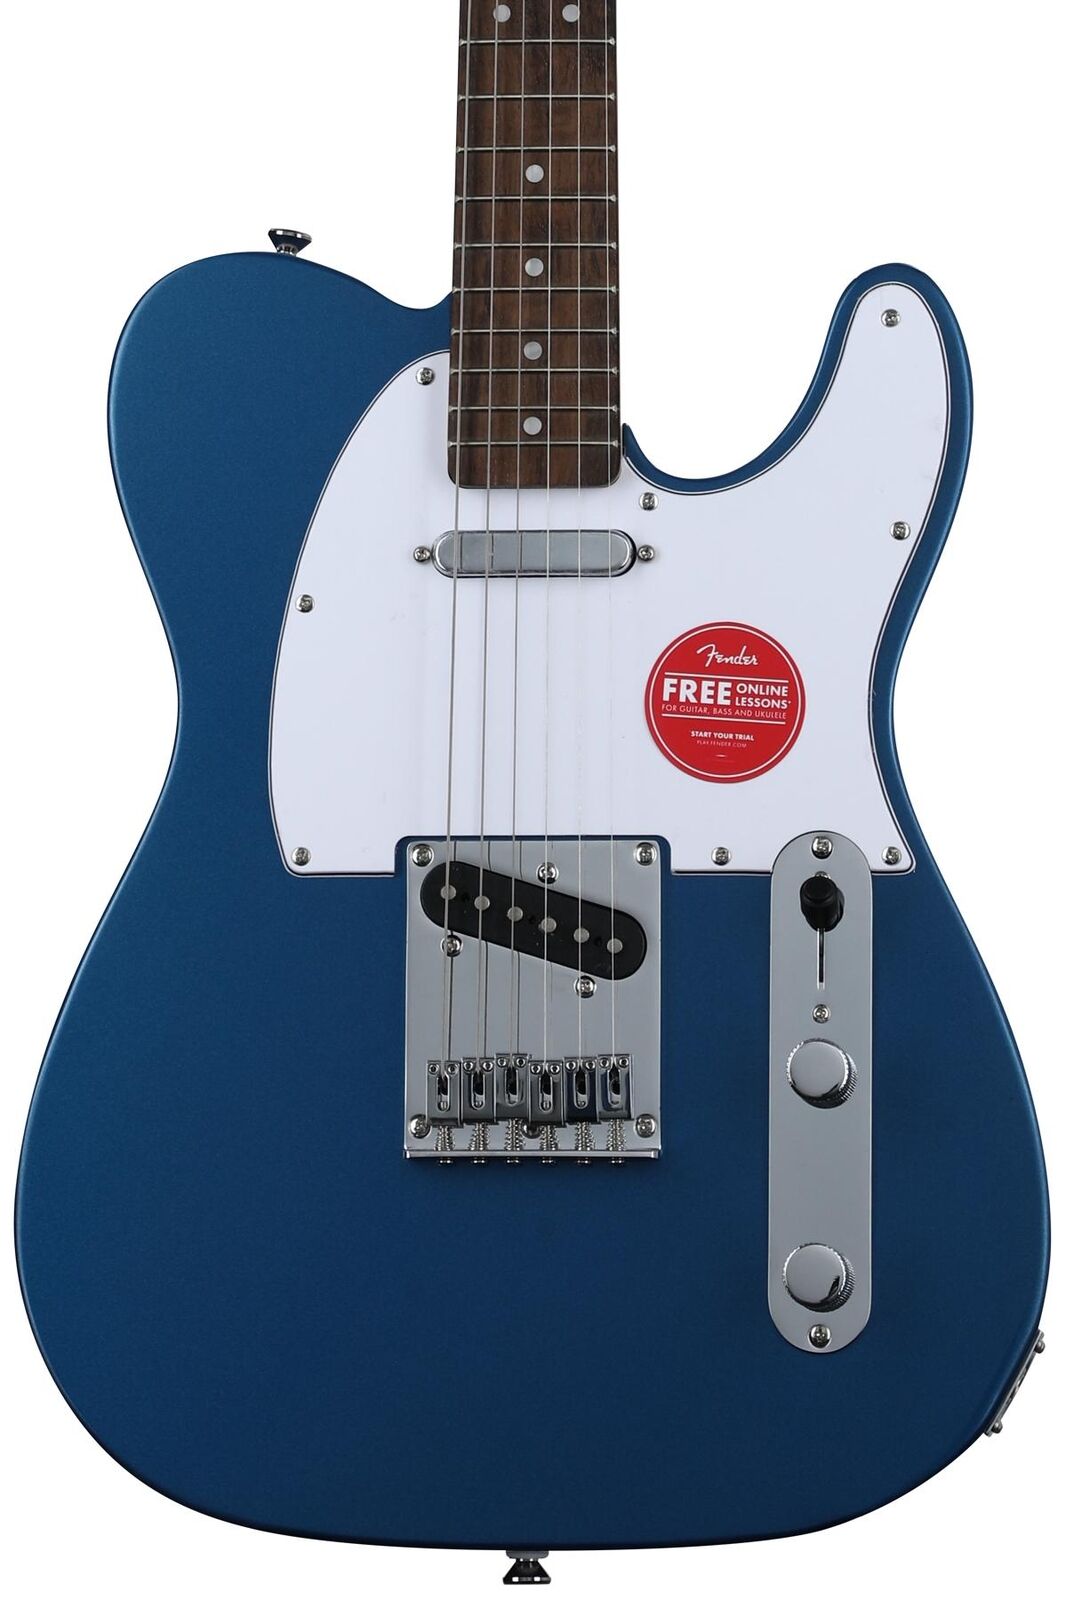 Squier Affinity Series Telecaster Electric Guitar - Lake Placid Blue with Laurel